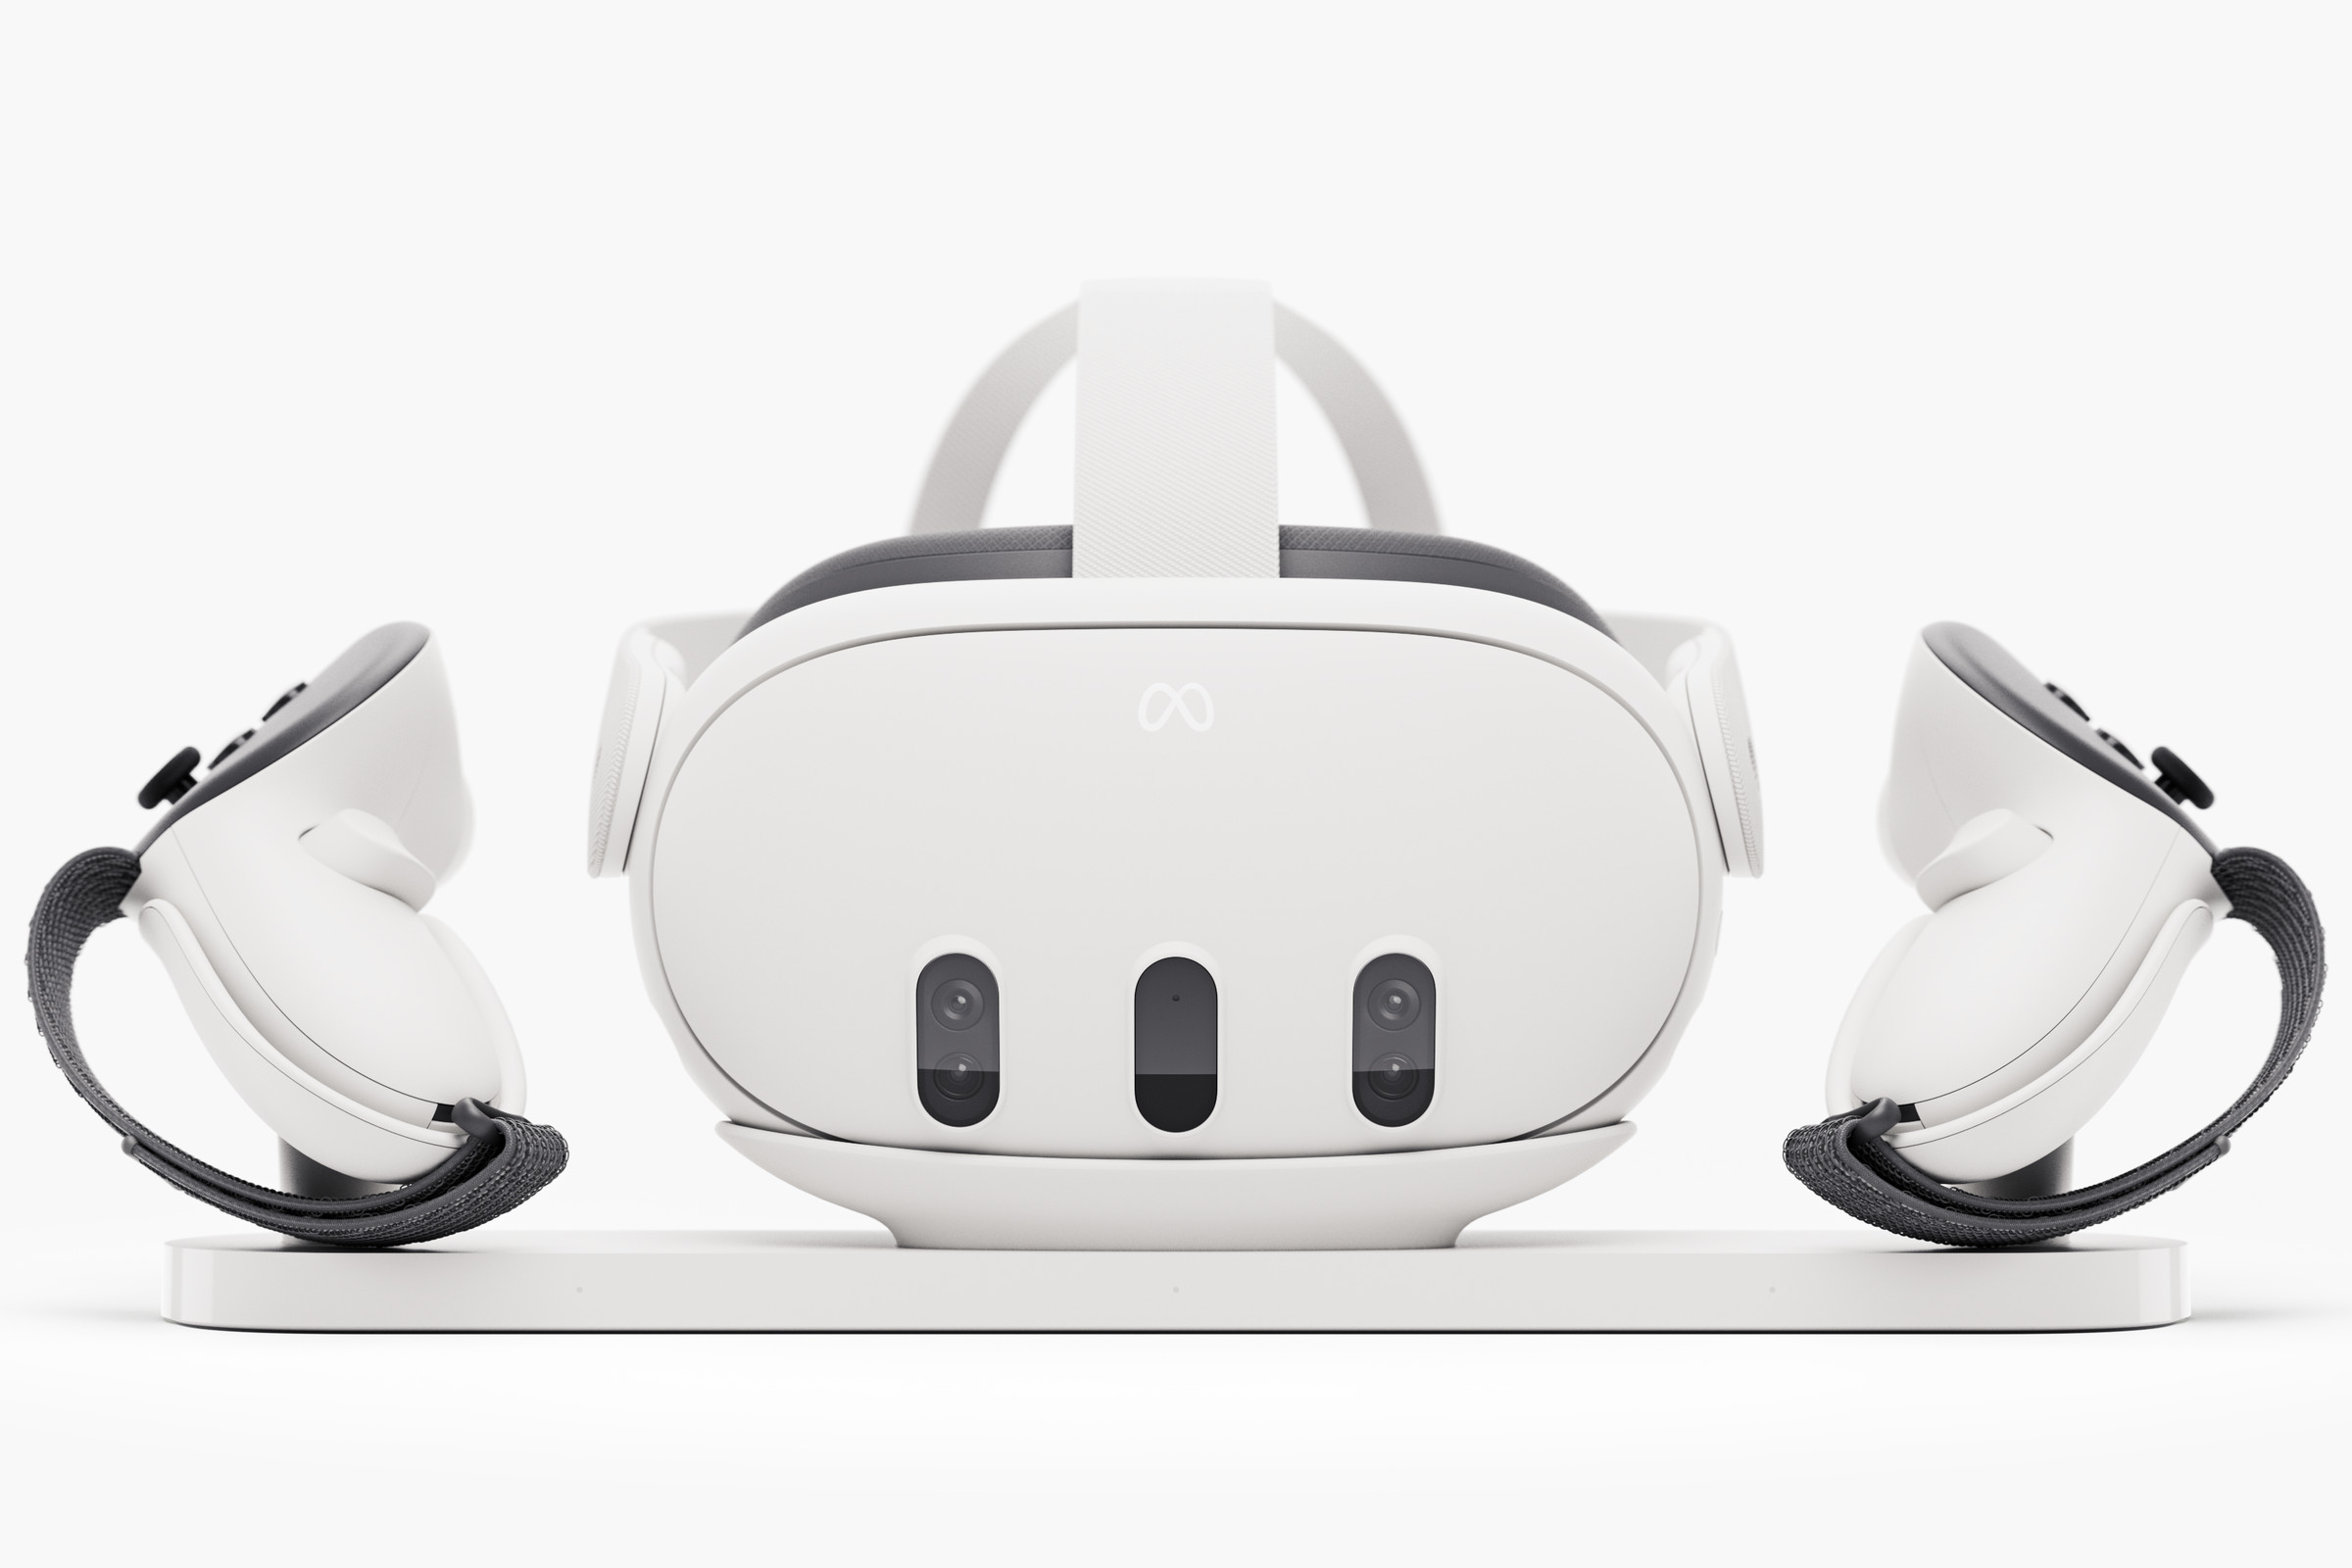 An image showing the Quest 3 headset on a charging dock